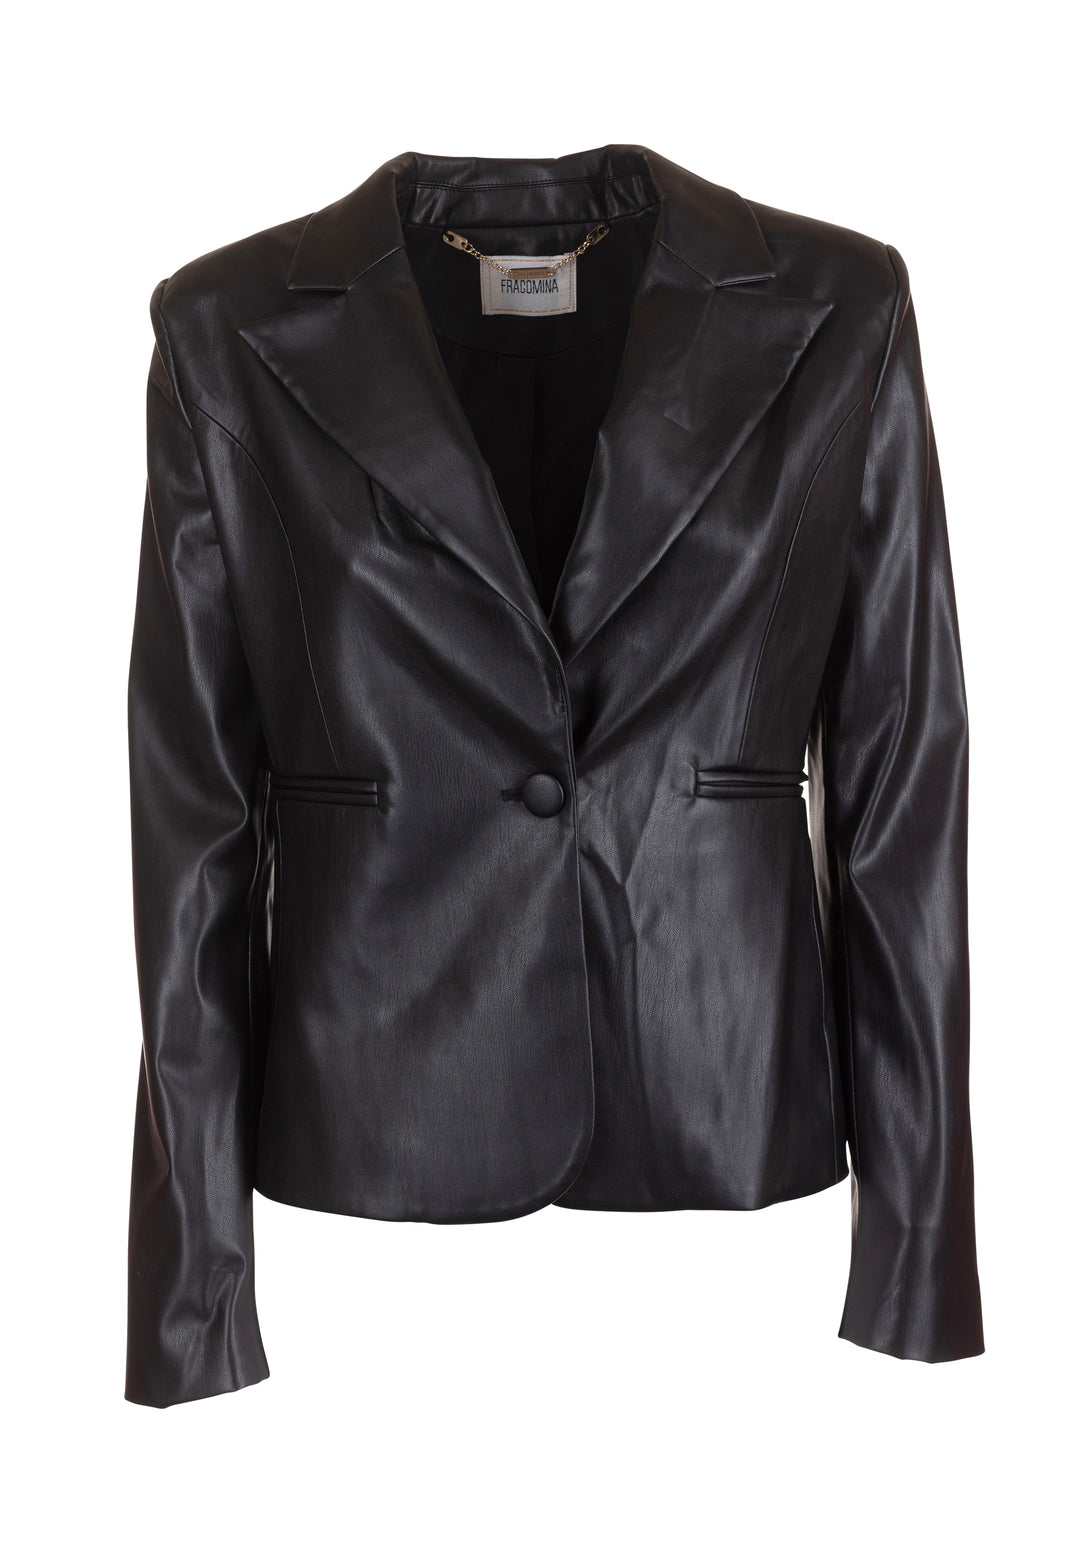 Blazer jacket slim fit single breasted made in eco leather